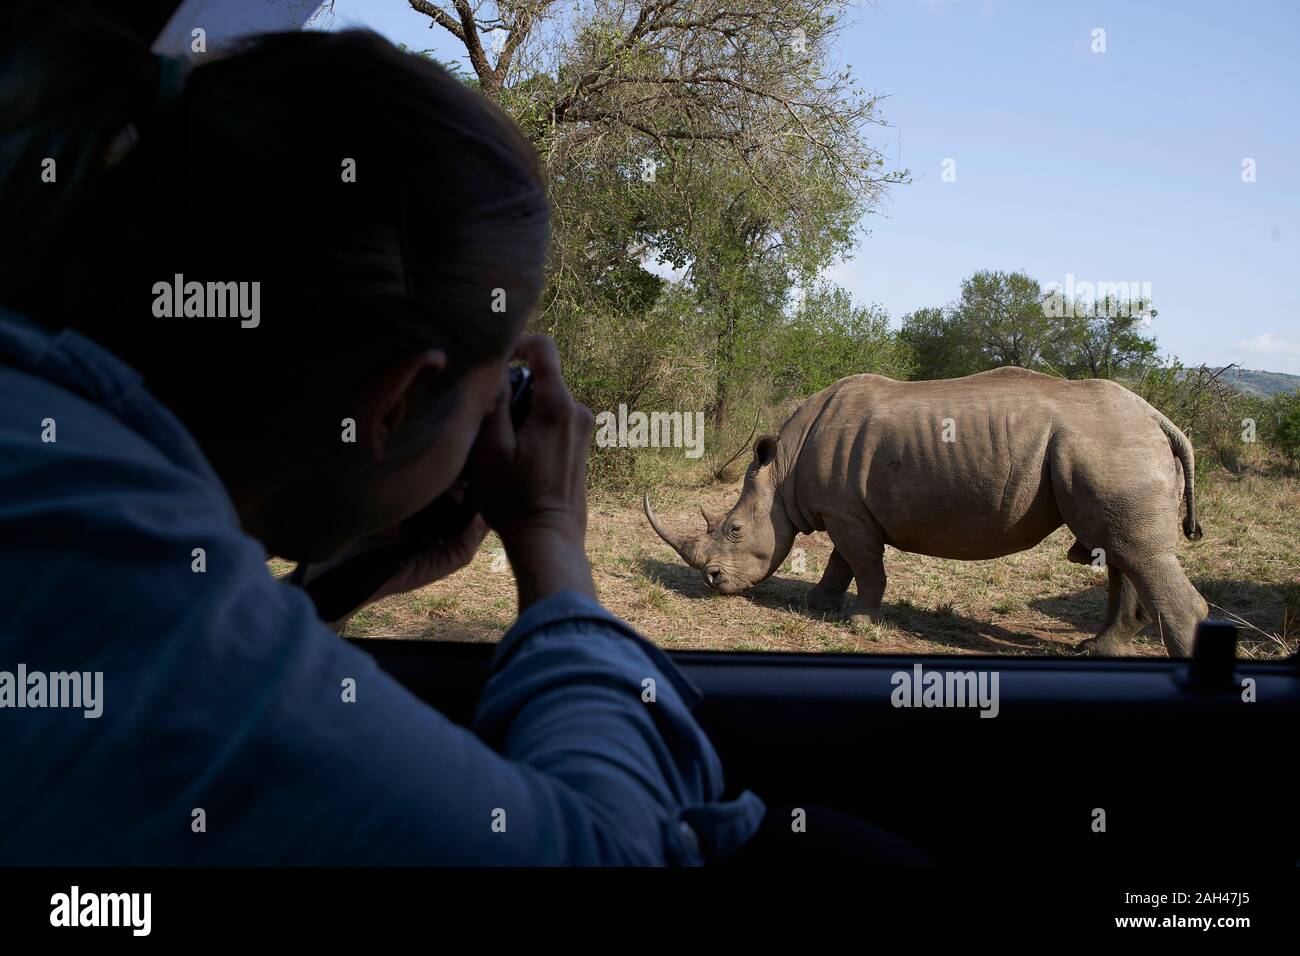 Woman taking a picture of a rhinoceros out of the car window,  Hluhluwe-Imfolozi Park, South Africa Stock Photo